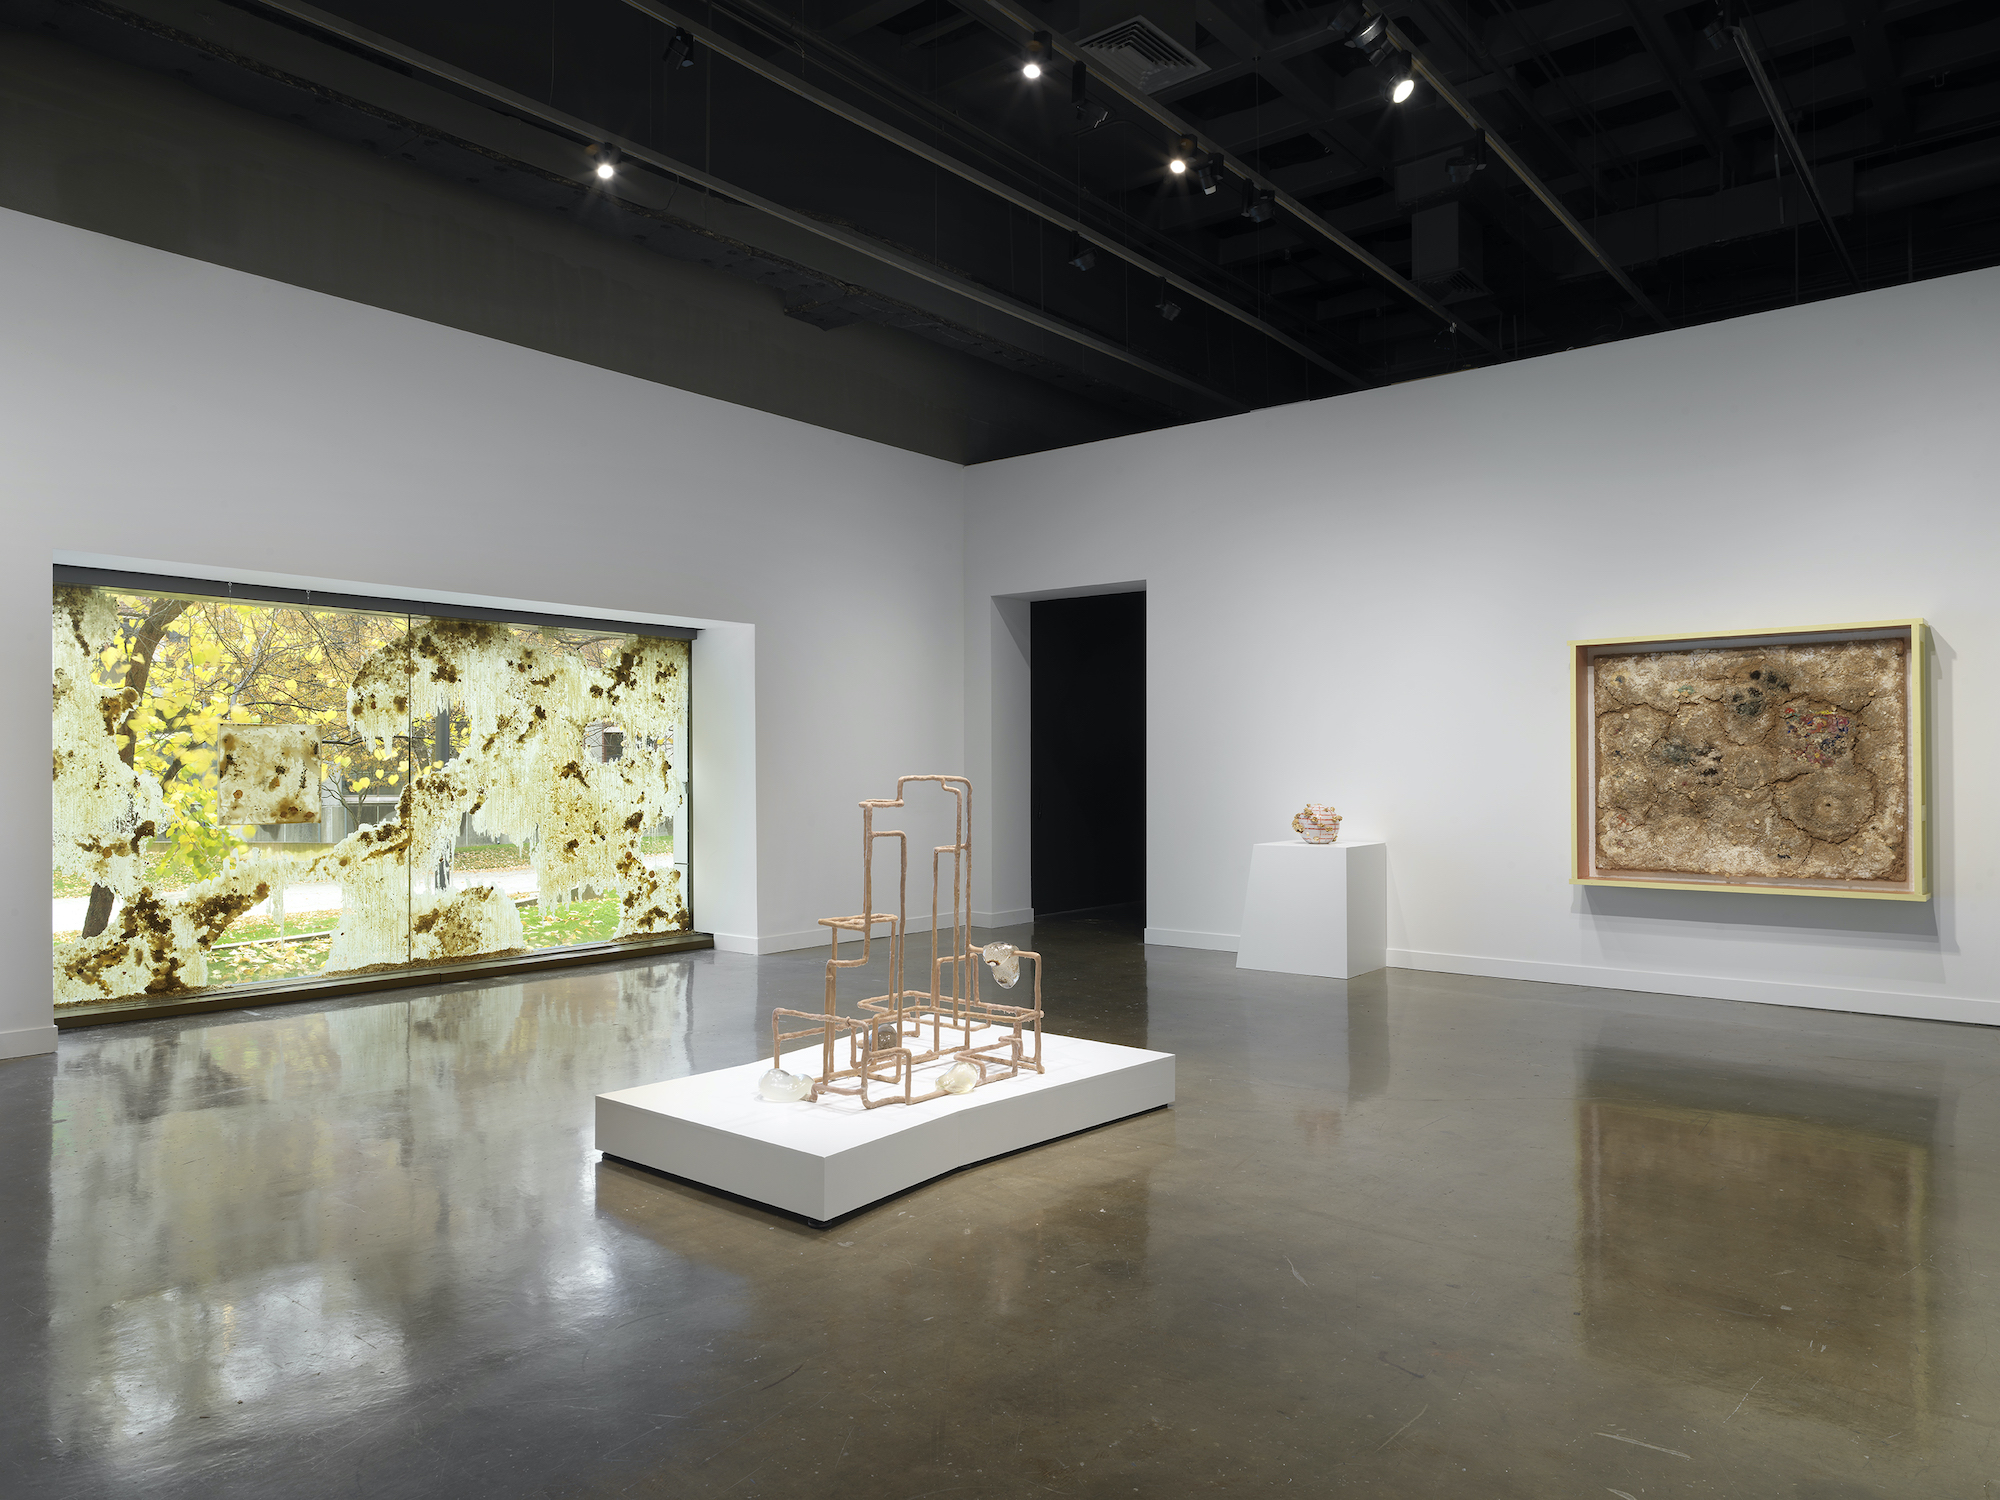 A window installation of drips and smears of beeswax and flora, behind a geometric sculptural work in the center on a white platform. A smaller spherical sculpture sits on a white pedestal and a large rectangular sculpture is hung on the wall.